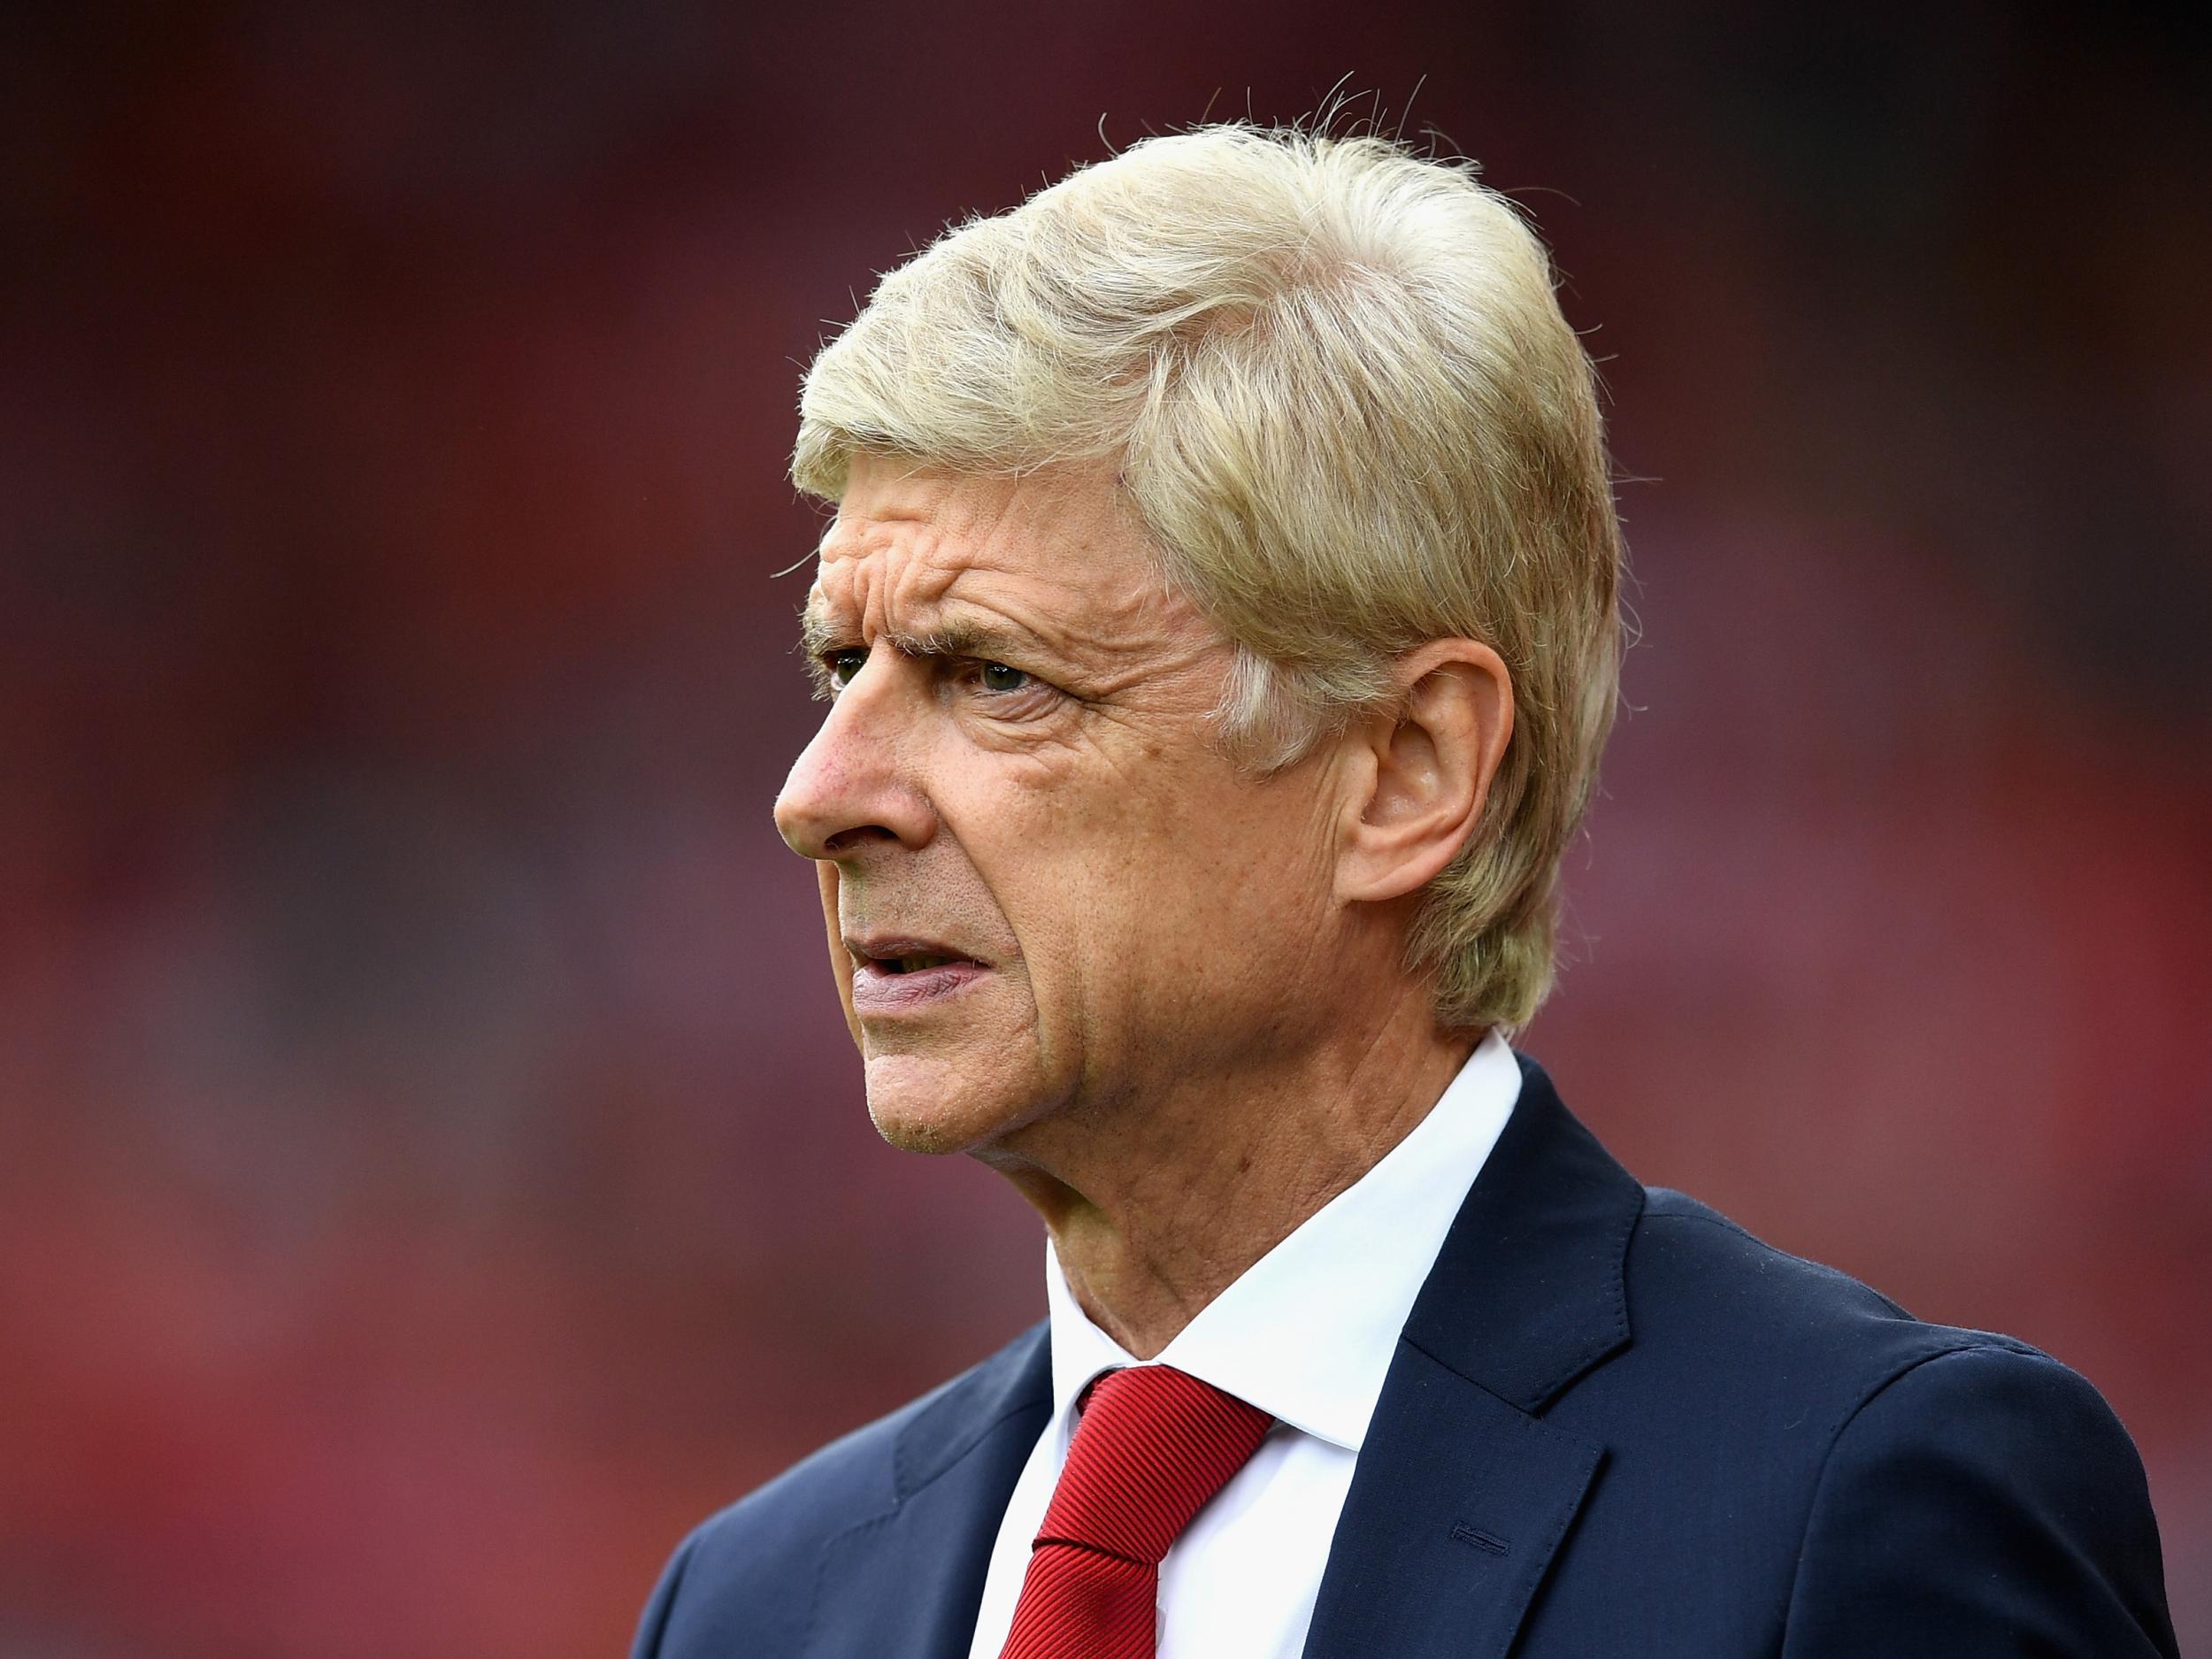 Ian Wright believes Arsene Wenger will not quit Arsenal of his own accord but must go soon